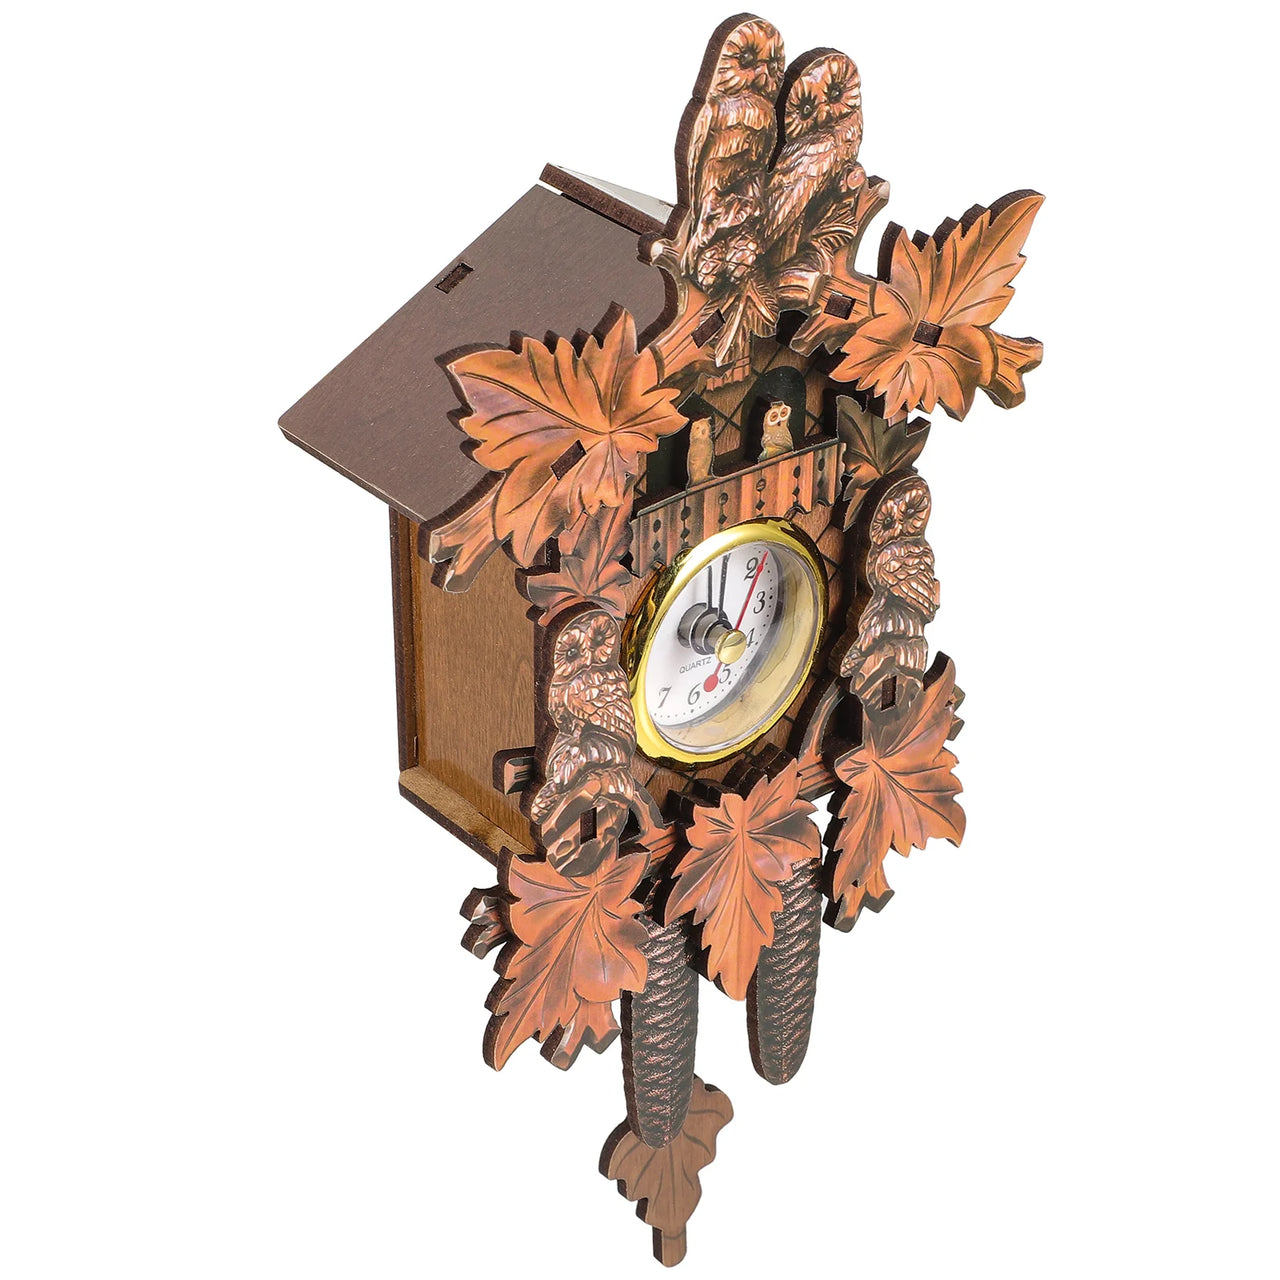 Owl Cuckoo Clock on a white background